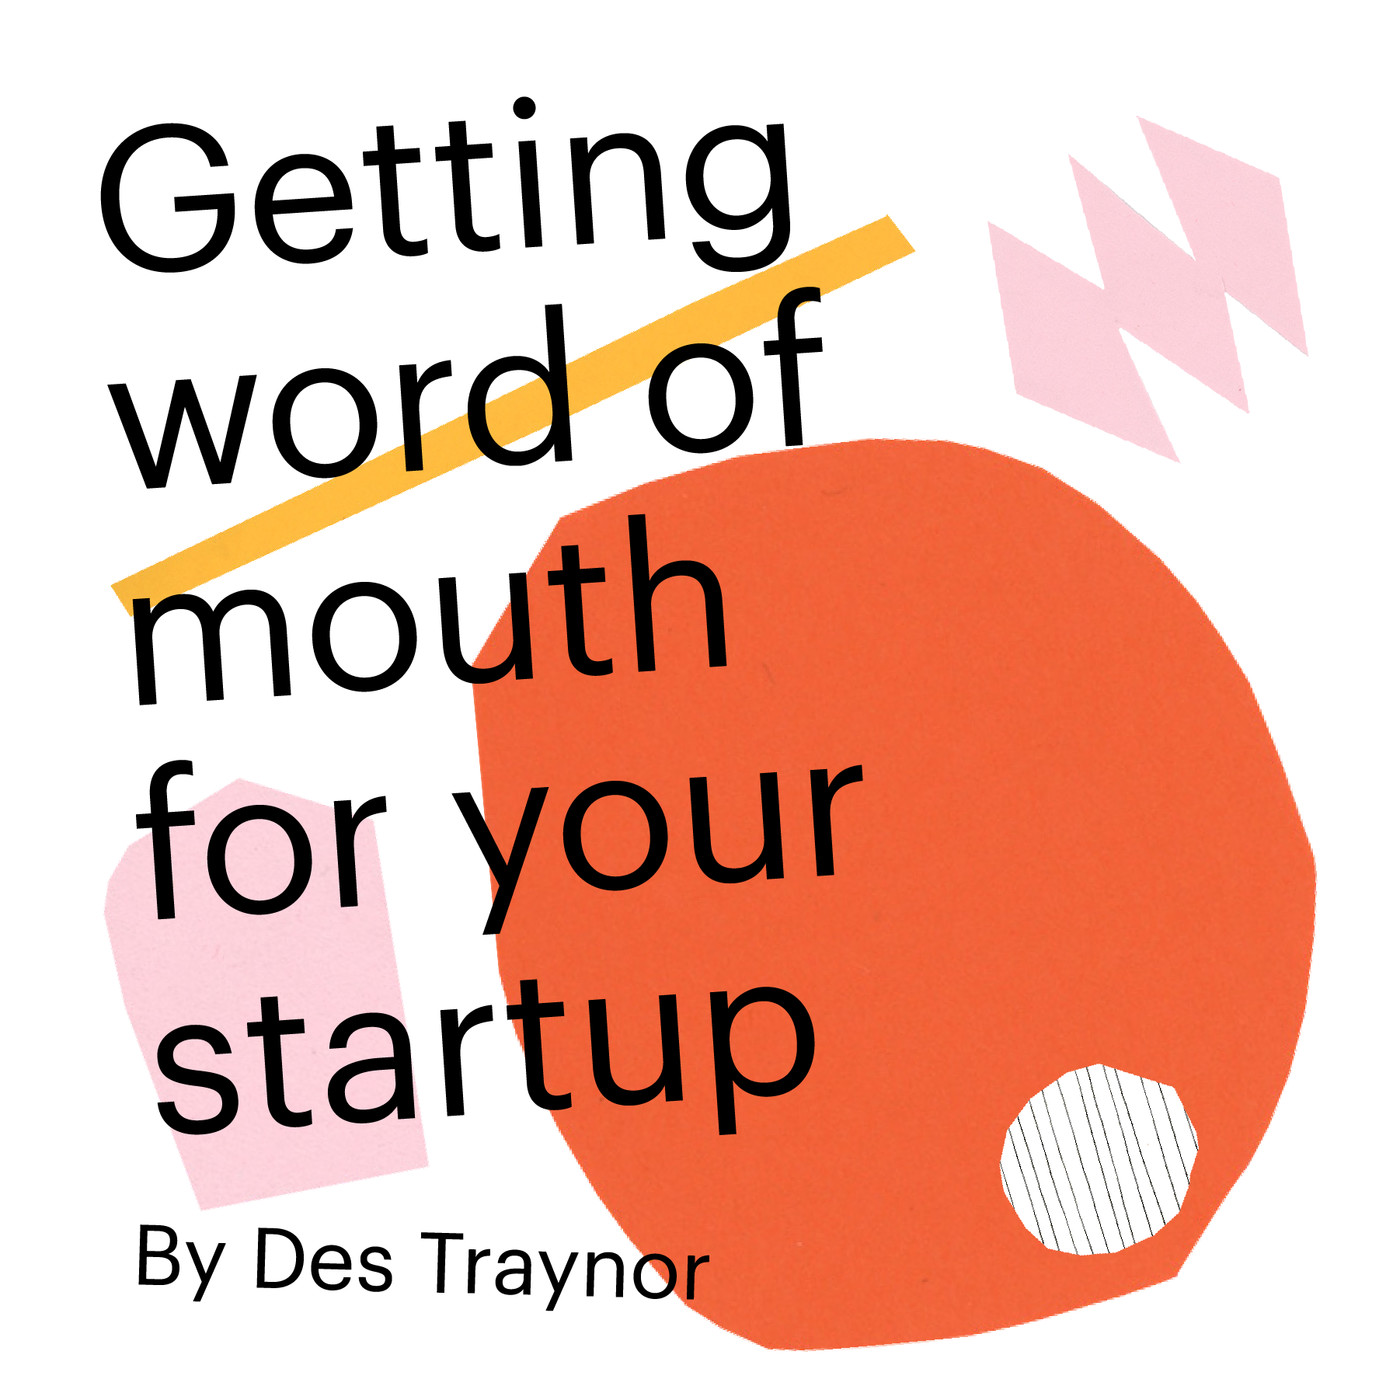 Chapter 4: Getting word of mouth for your startup